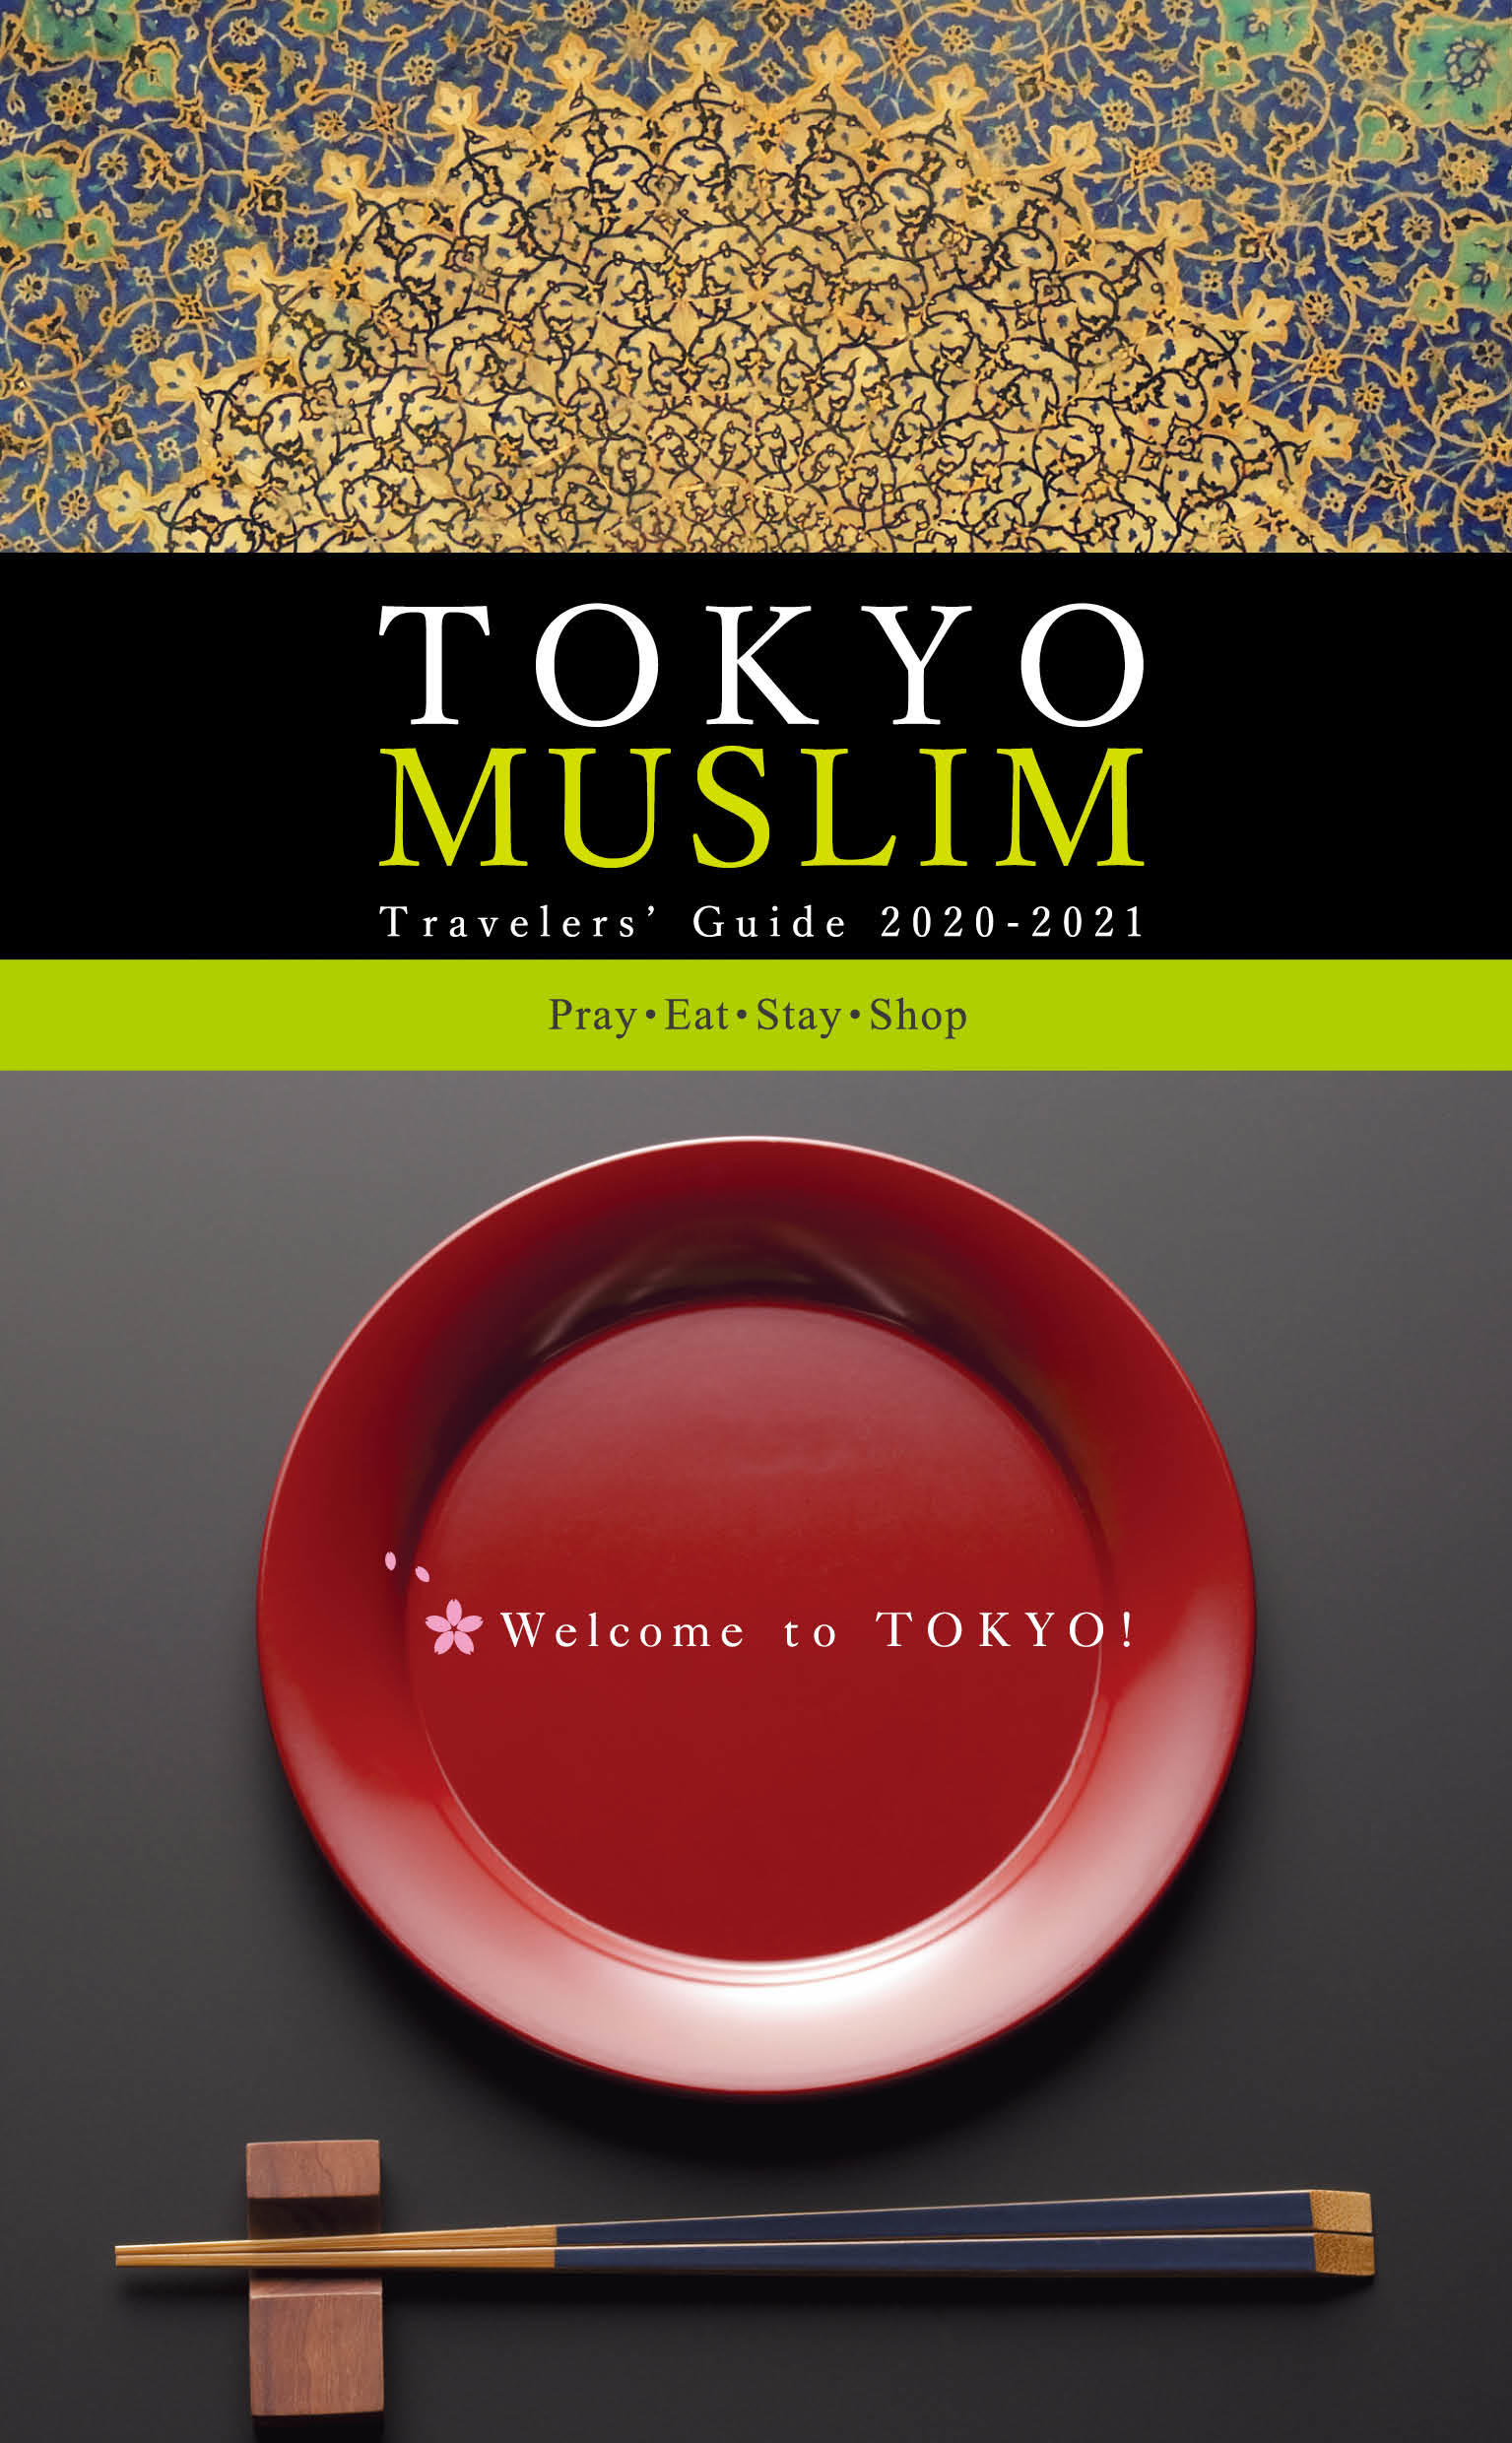 image: pamphlets for Muslim travelers